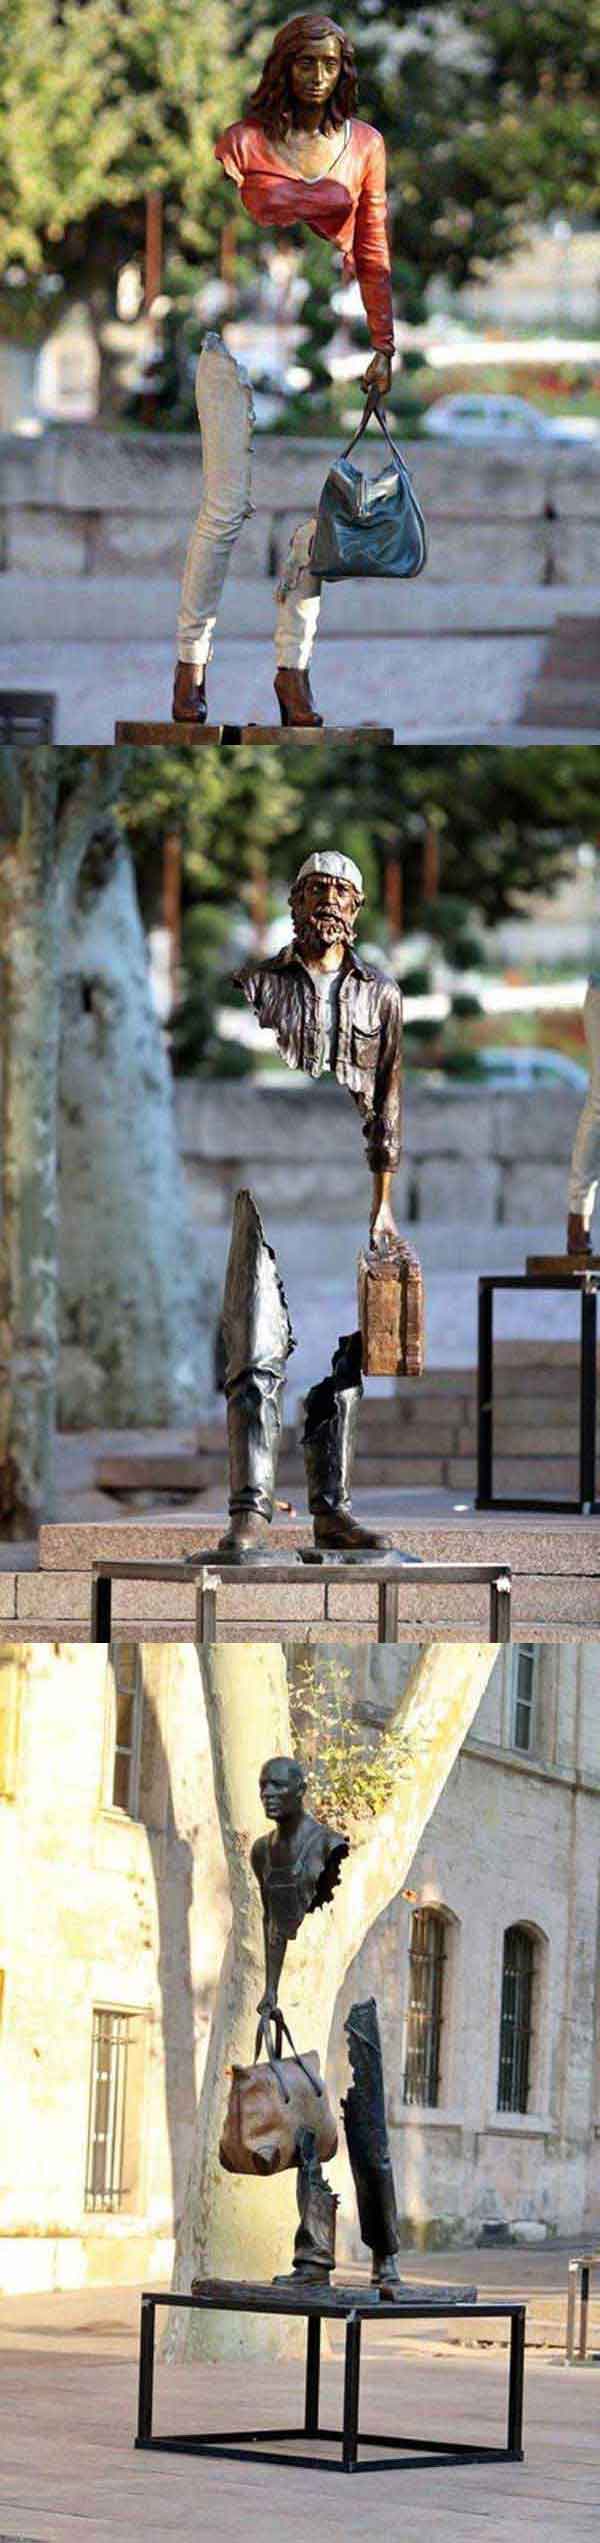 Les voyageurs - Surreal sculptures by Bruno Catalano